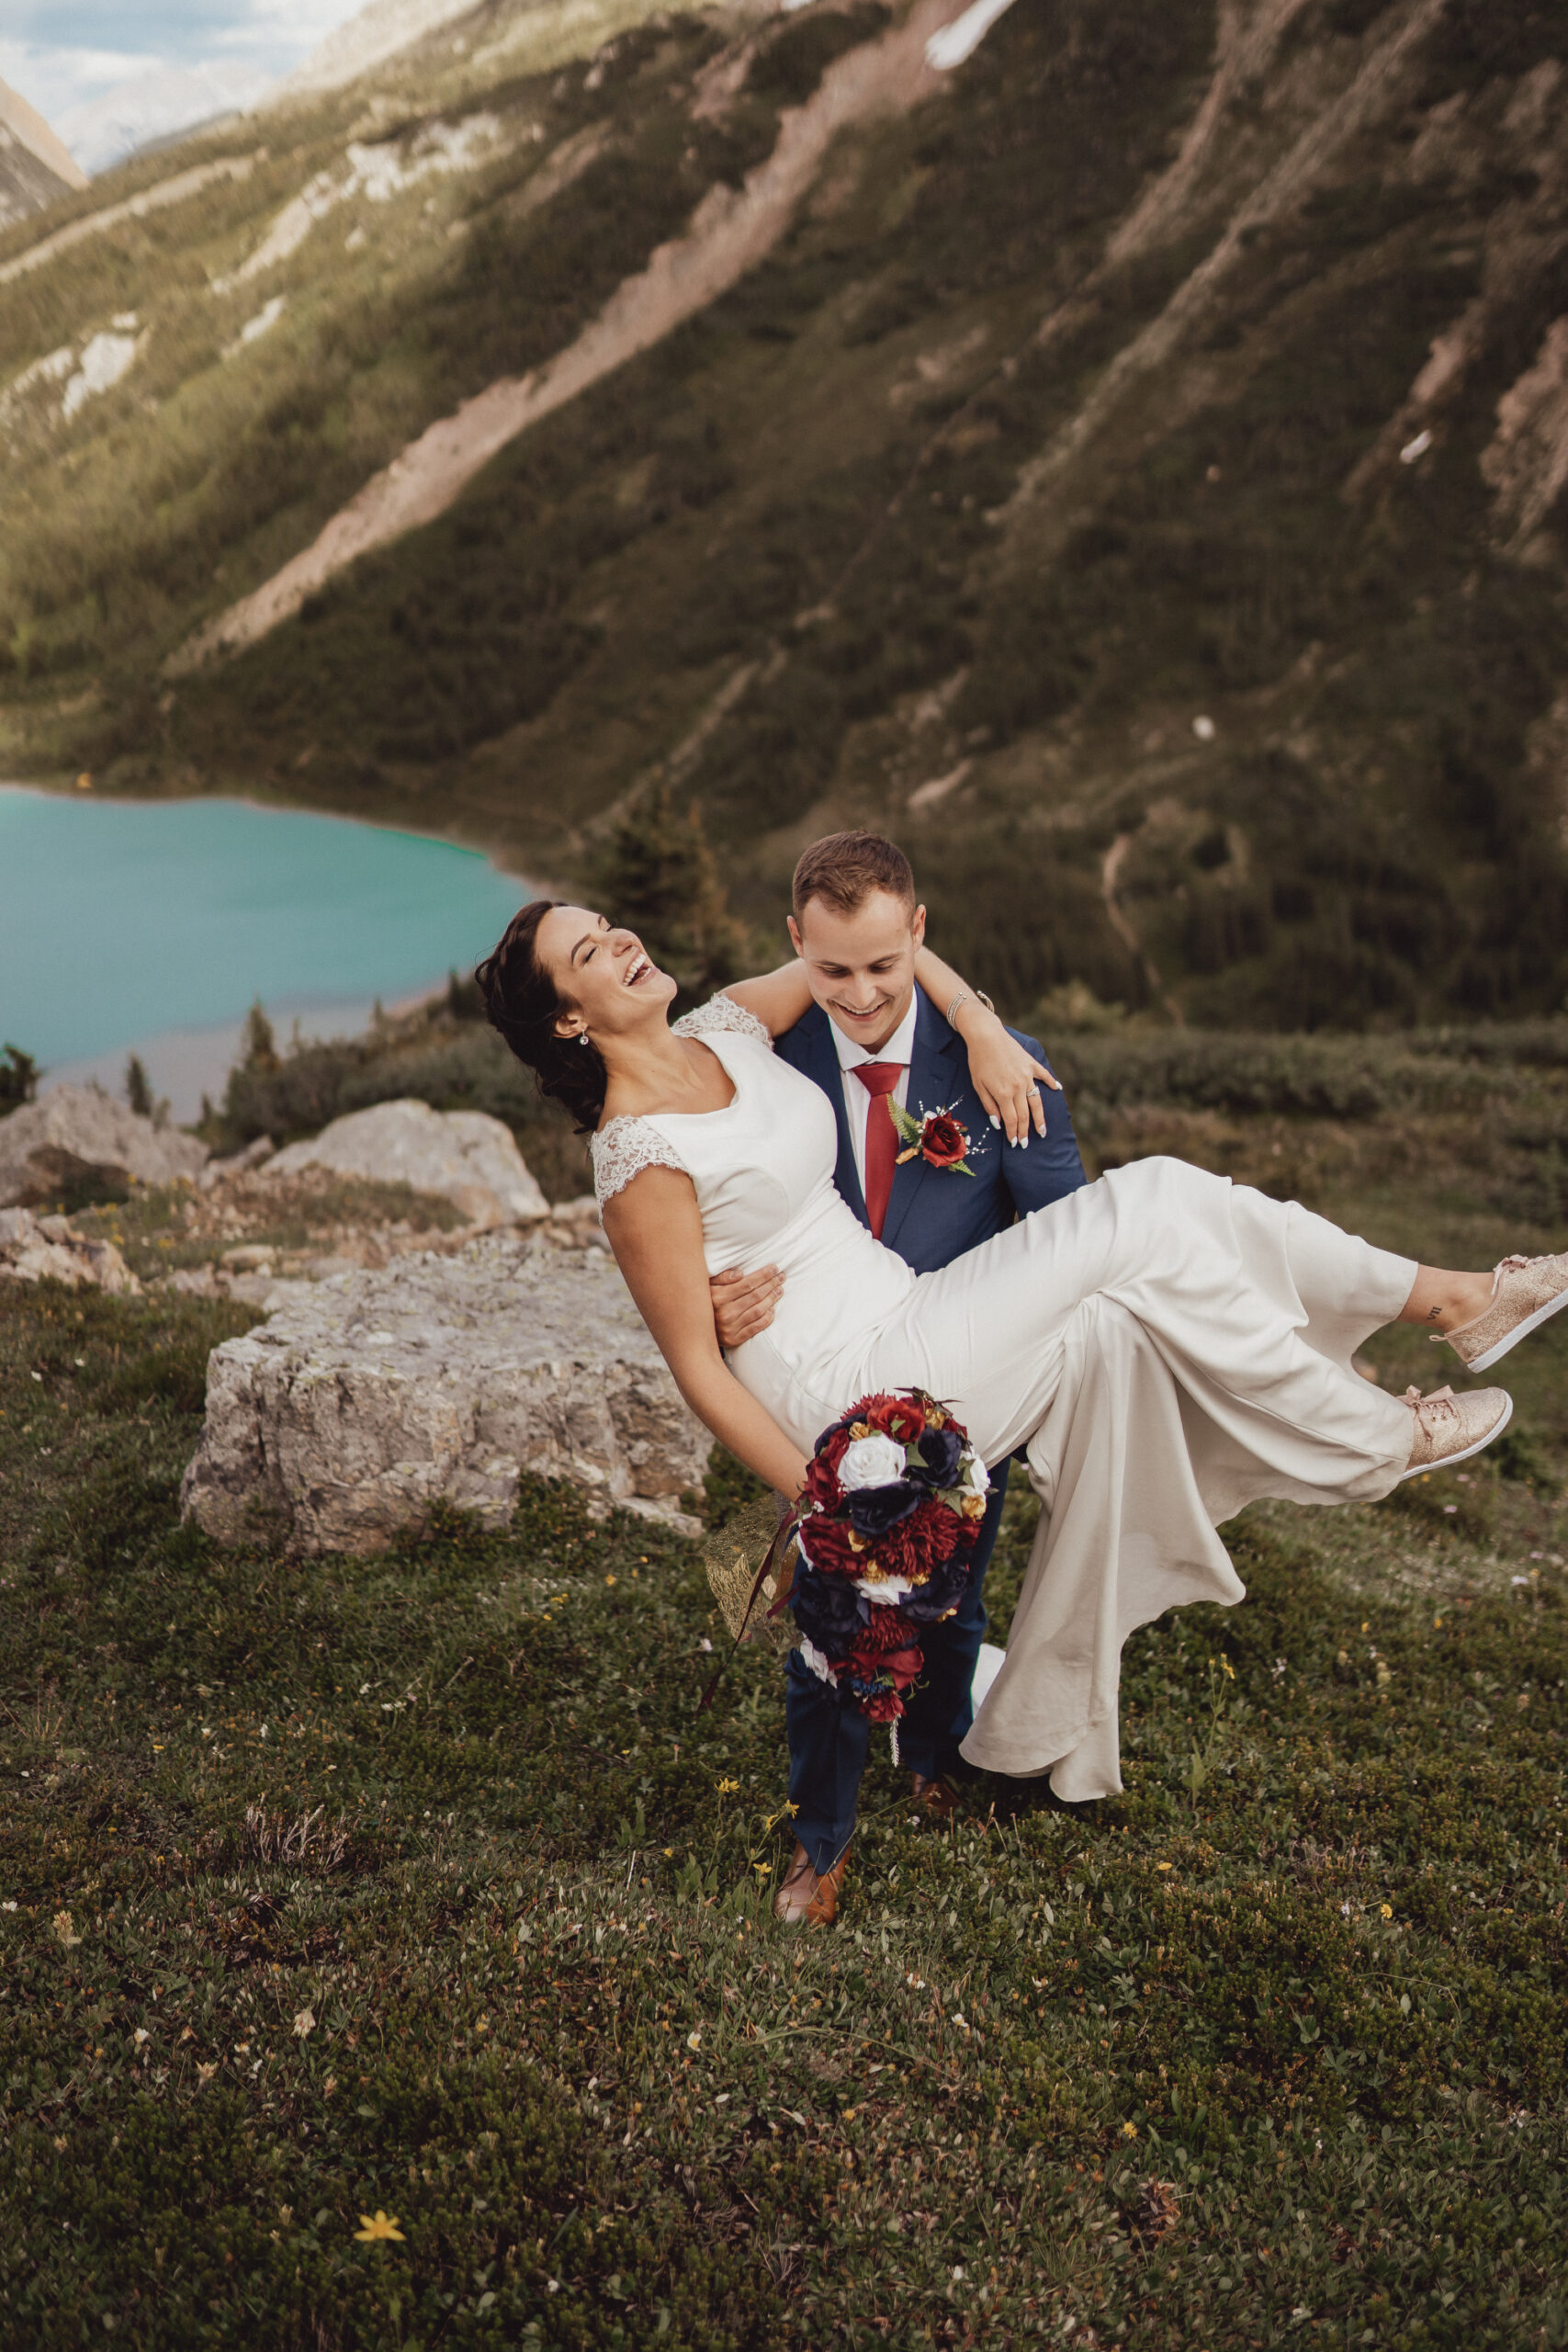 Bride and groom laughing in front of Rocky Mountain landscape